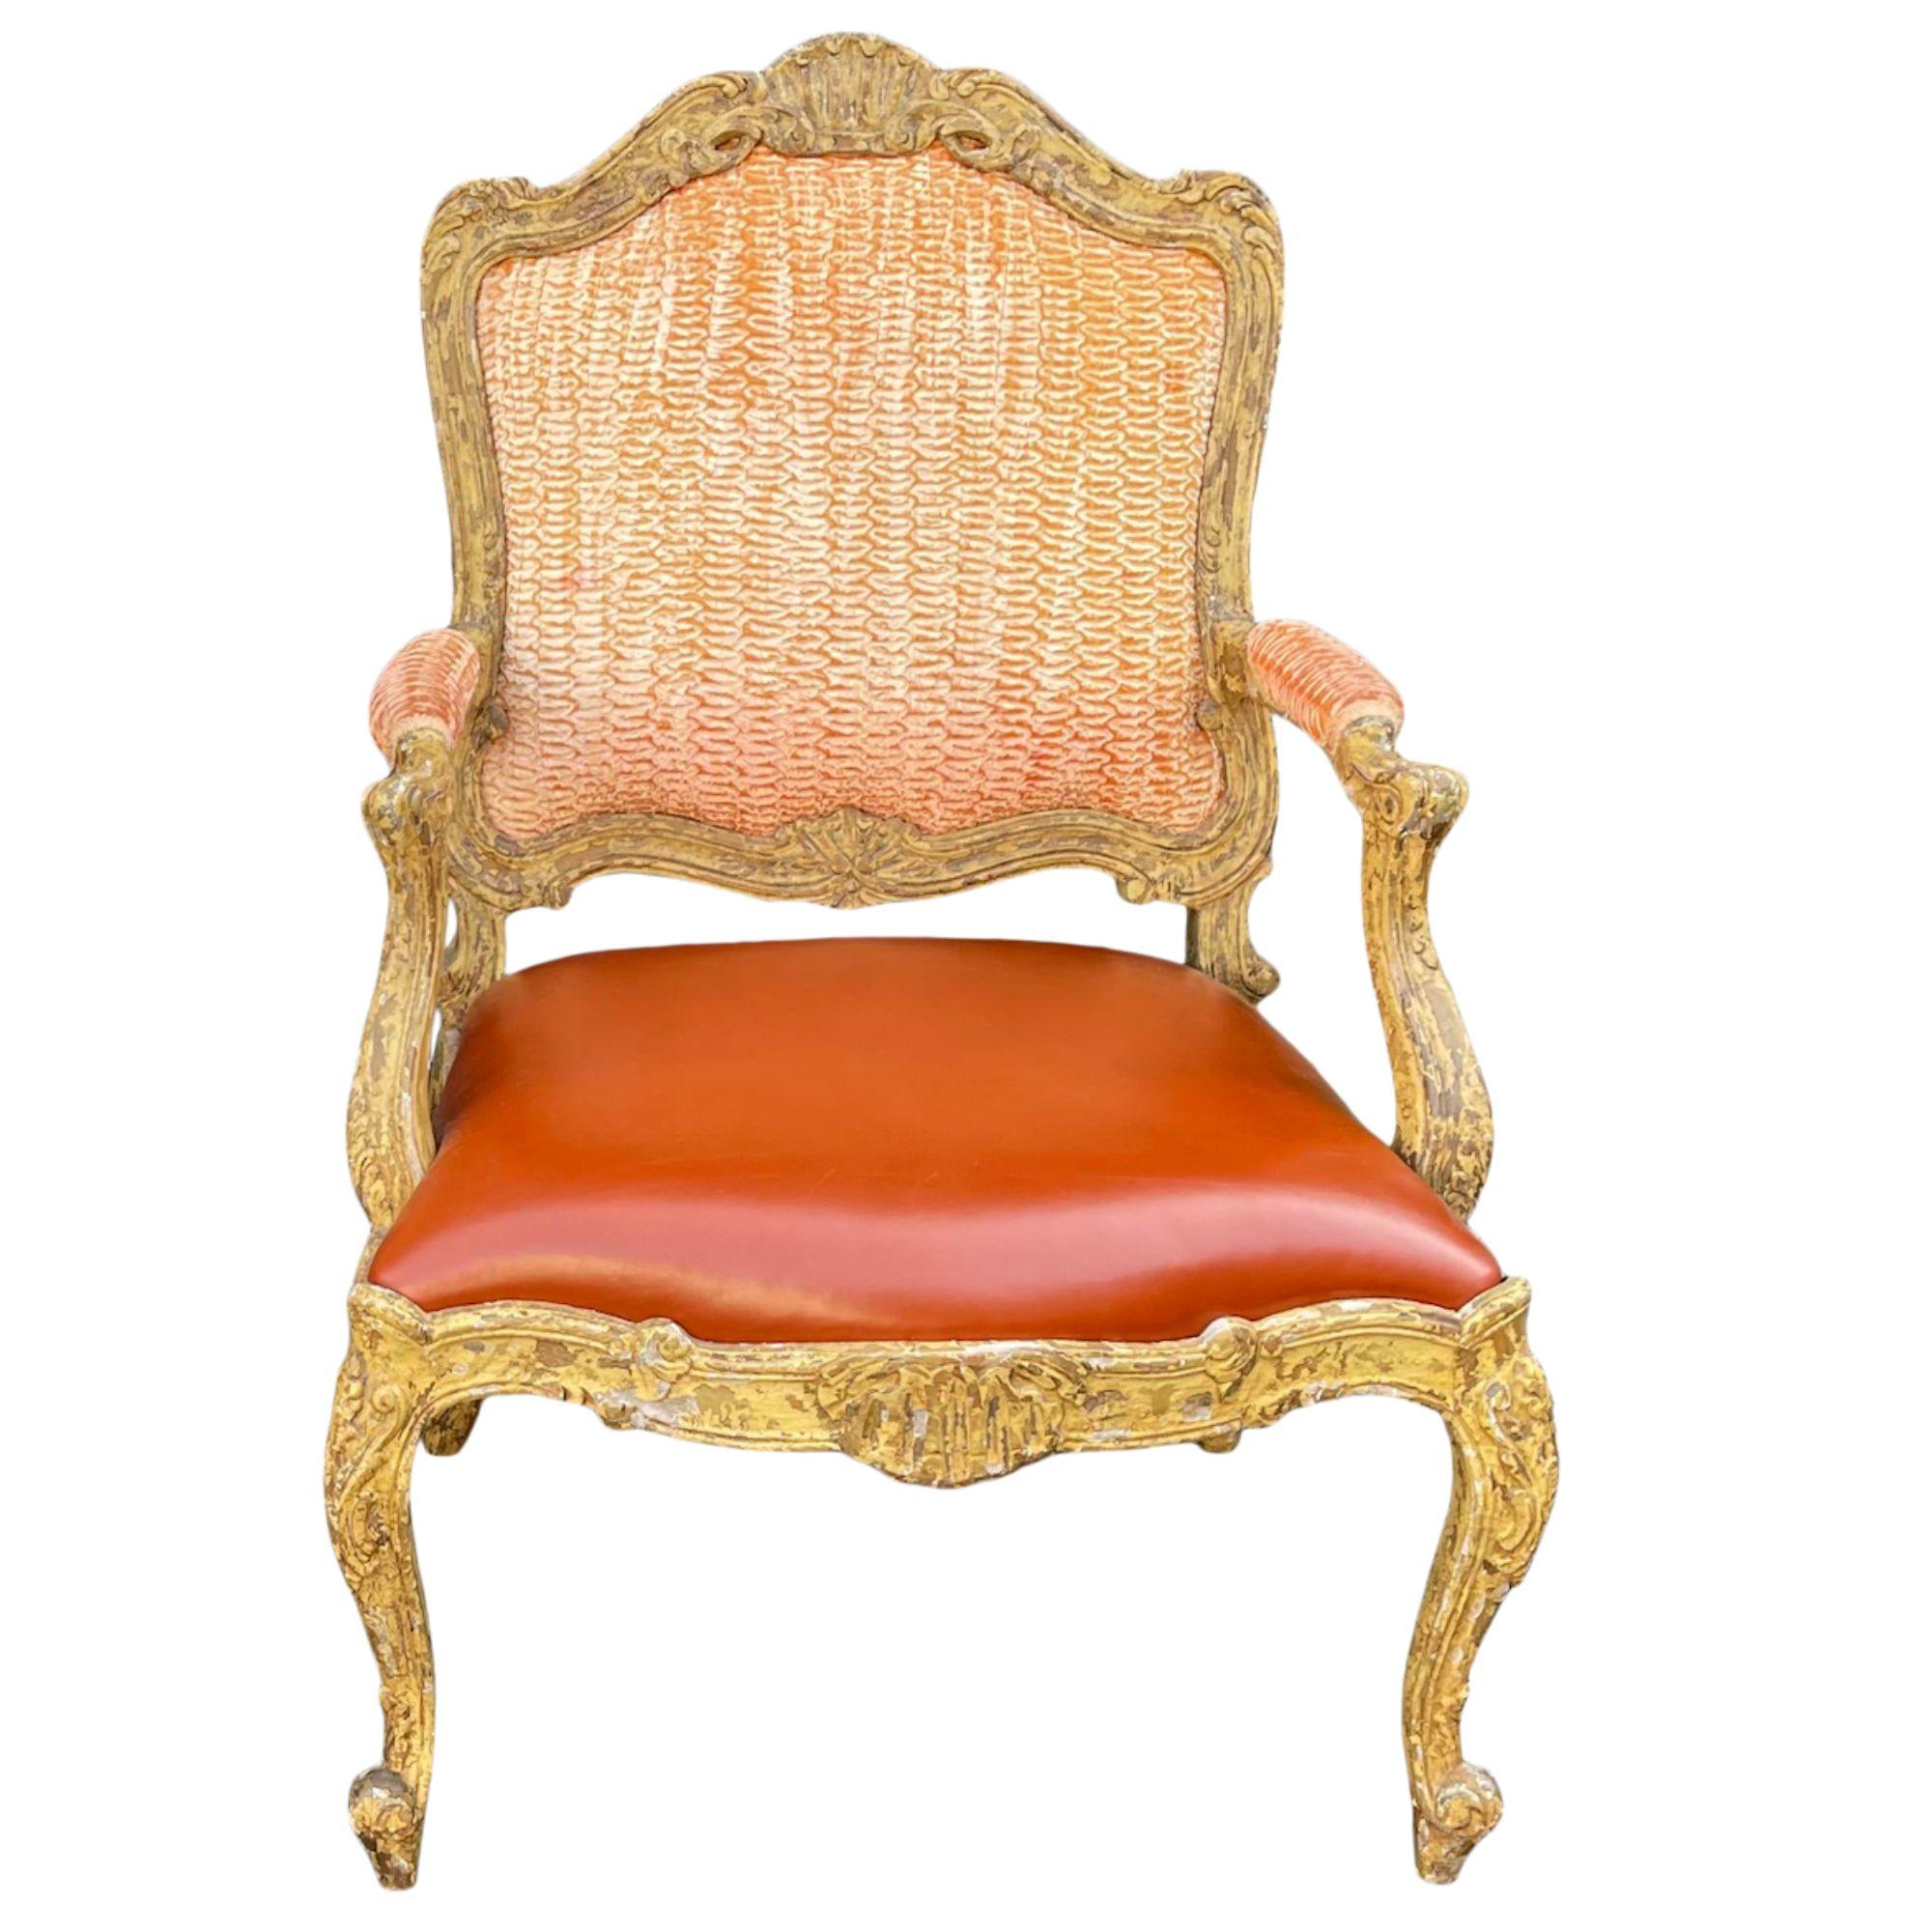 Antique 18th century style Venetian carved Italian armchair. 

Priced each.

Additional information: 
Materials: giltwood
Color: Burnt Orange
Period: 19th century
Styles: Italian
Number of Seats: 1
Item Type: Vintage, Antique or